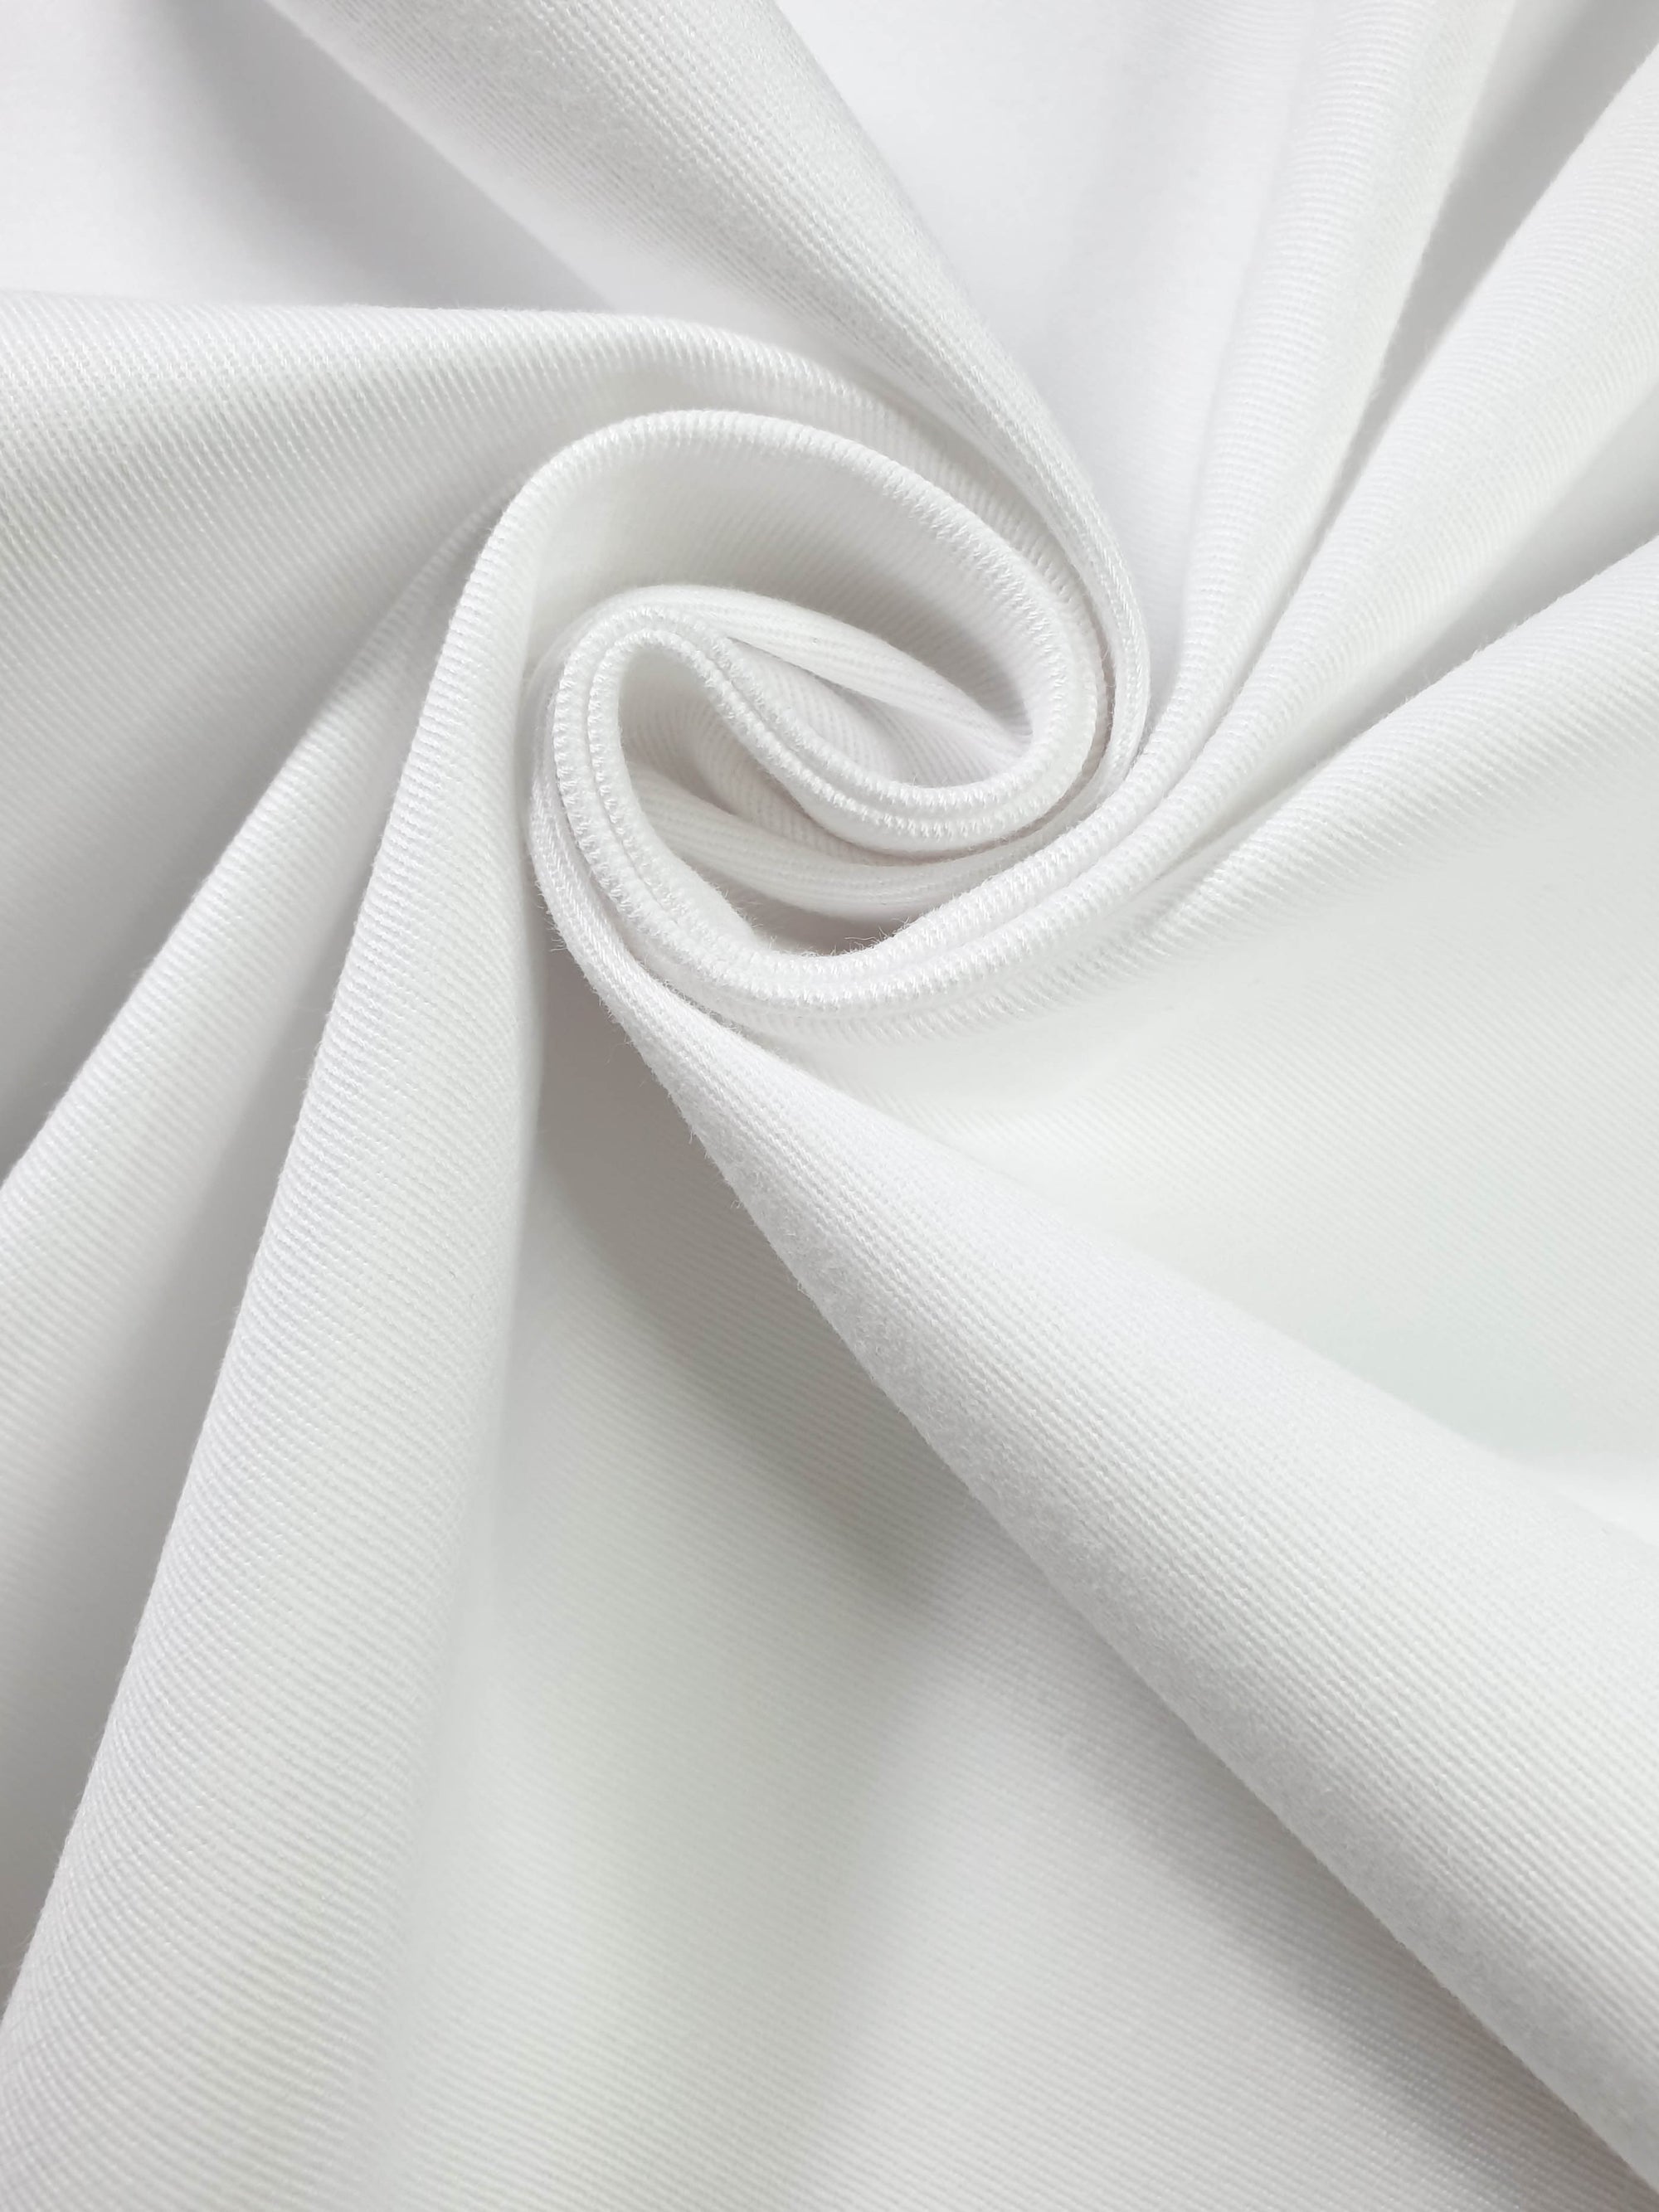 HUBERROSS White Color Brushed Cotton Twill with Stretch  97% Cotton 3% Lycra Cloth Made in Italy